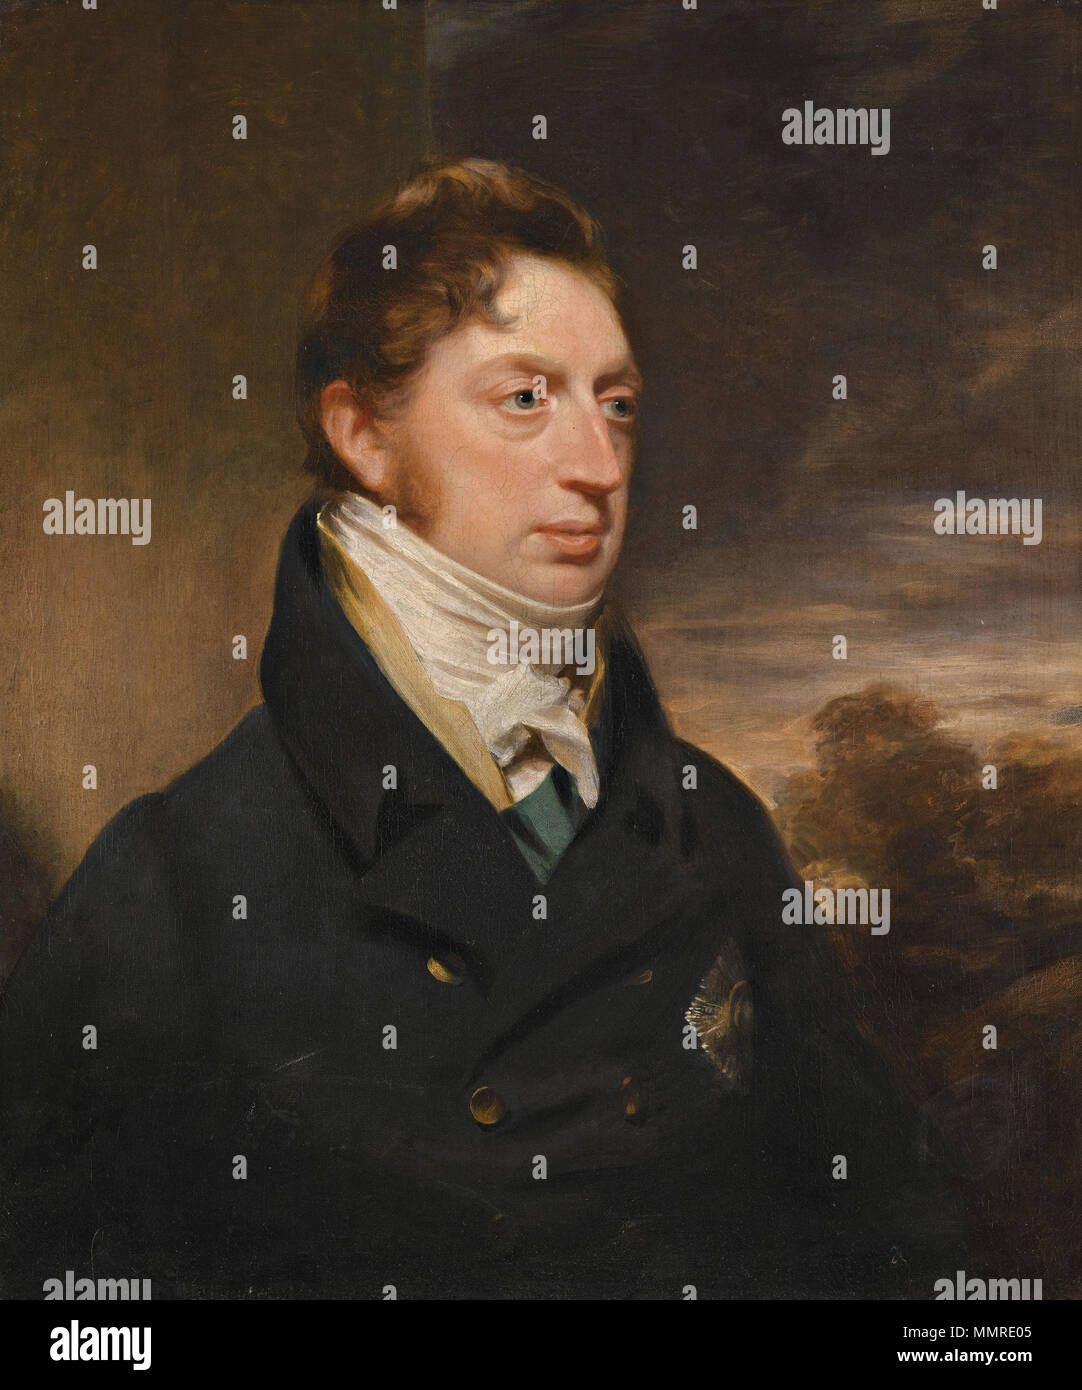 . Charles Brudenell-Bruce, 1st Marquess of Ailesbury (1773-1856) was ...